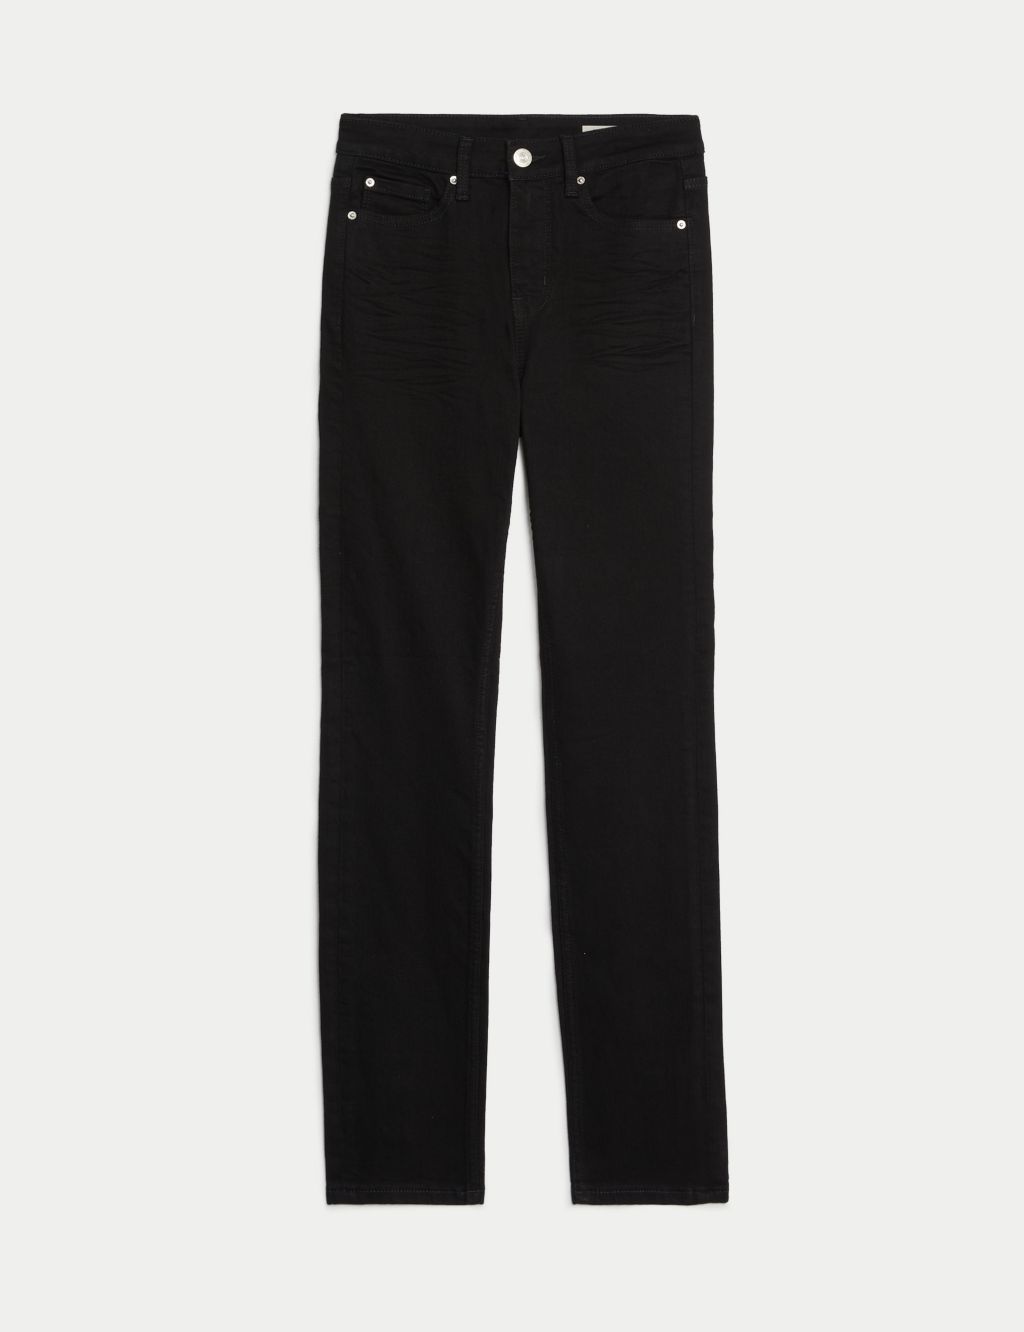 Lily Slim Fit Jeans with Stretch | M&S Collection | M&S